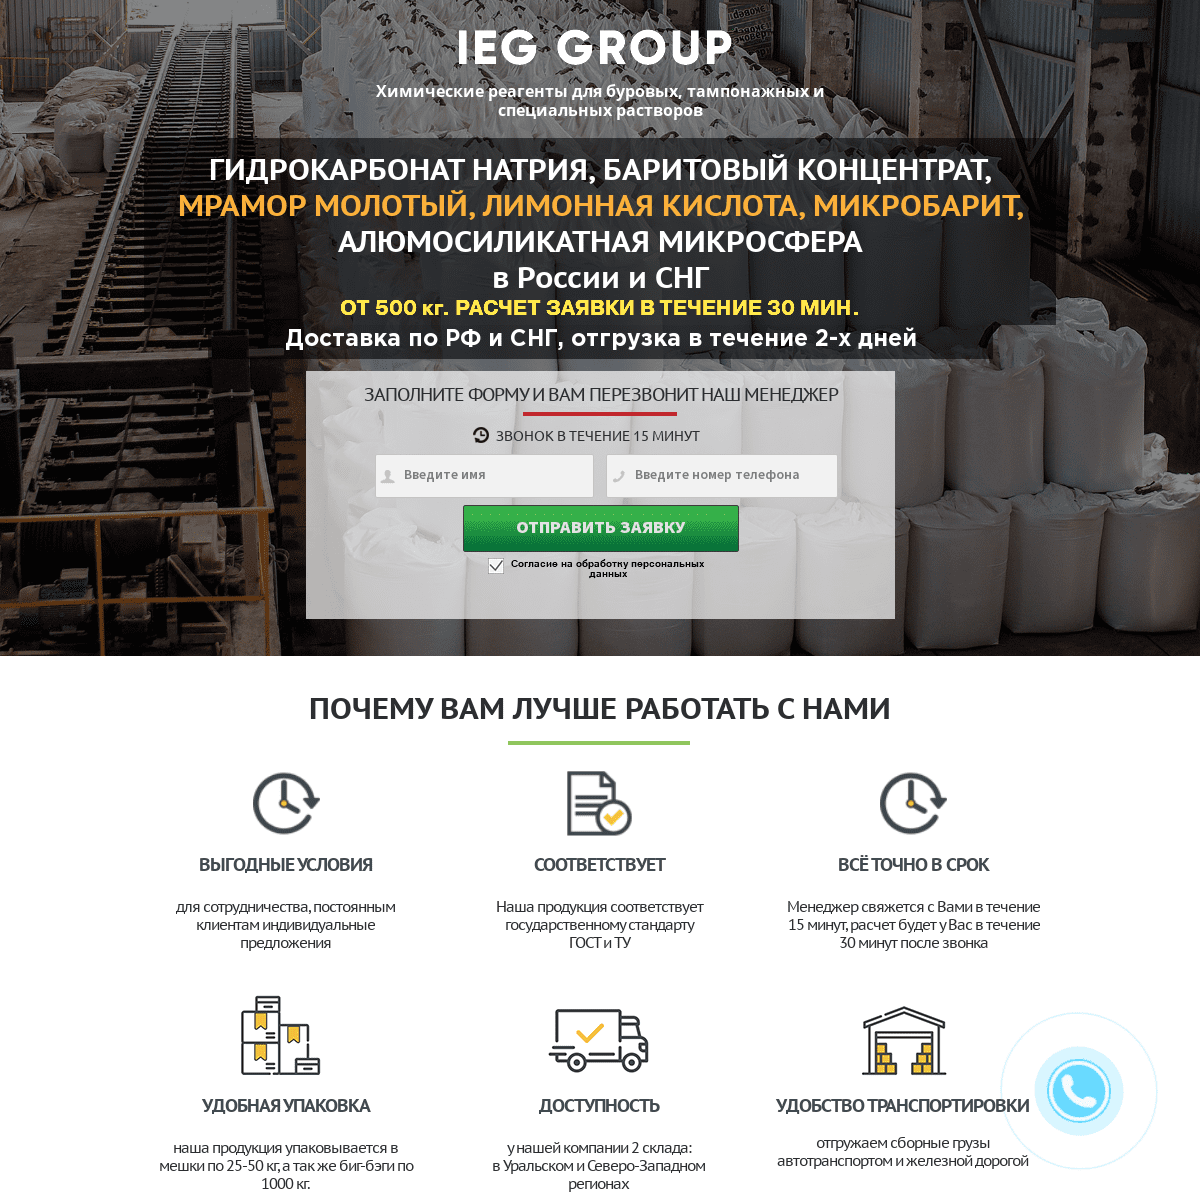 A complete backup of ieggroup.ru